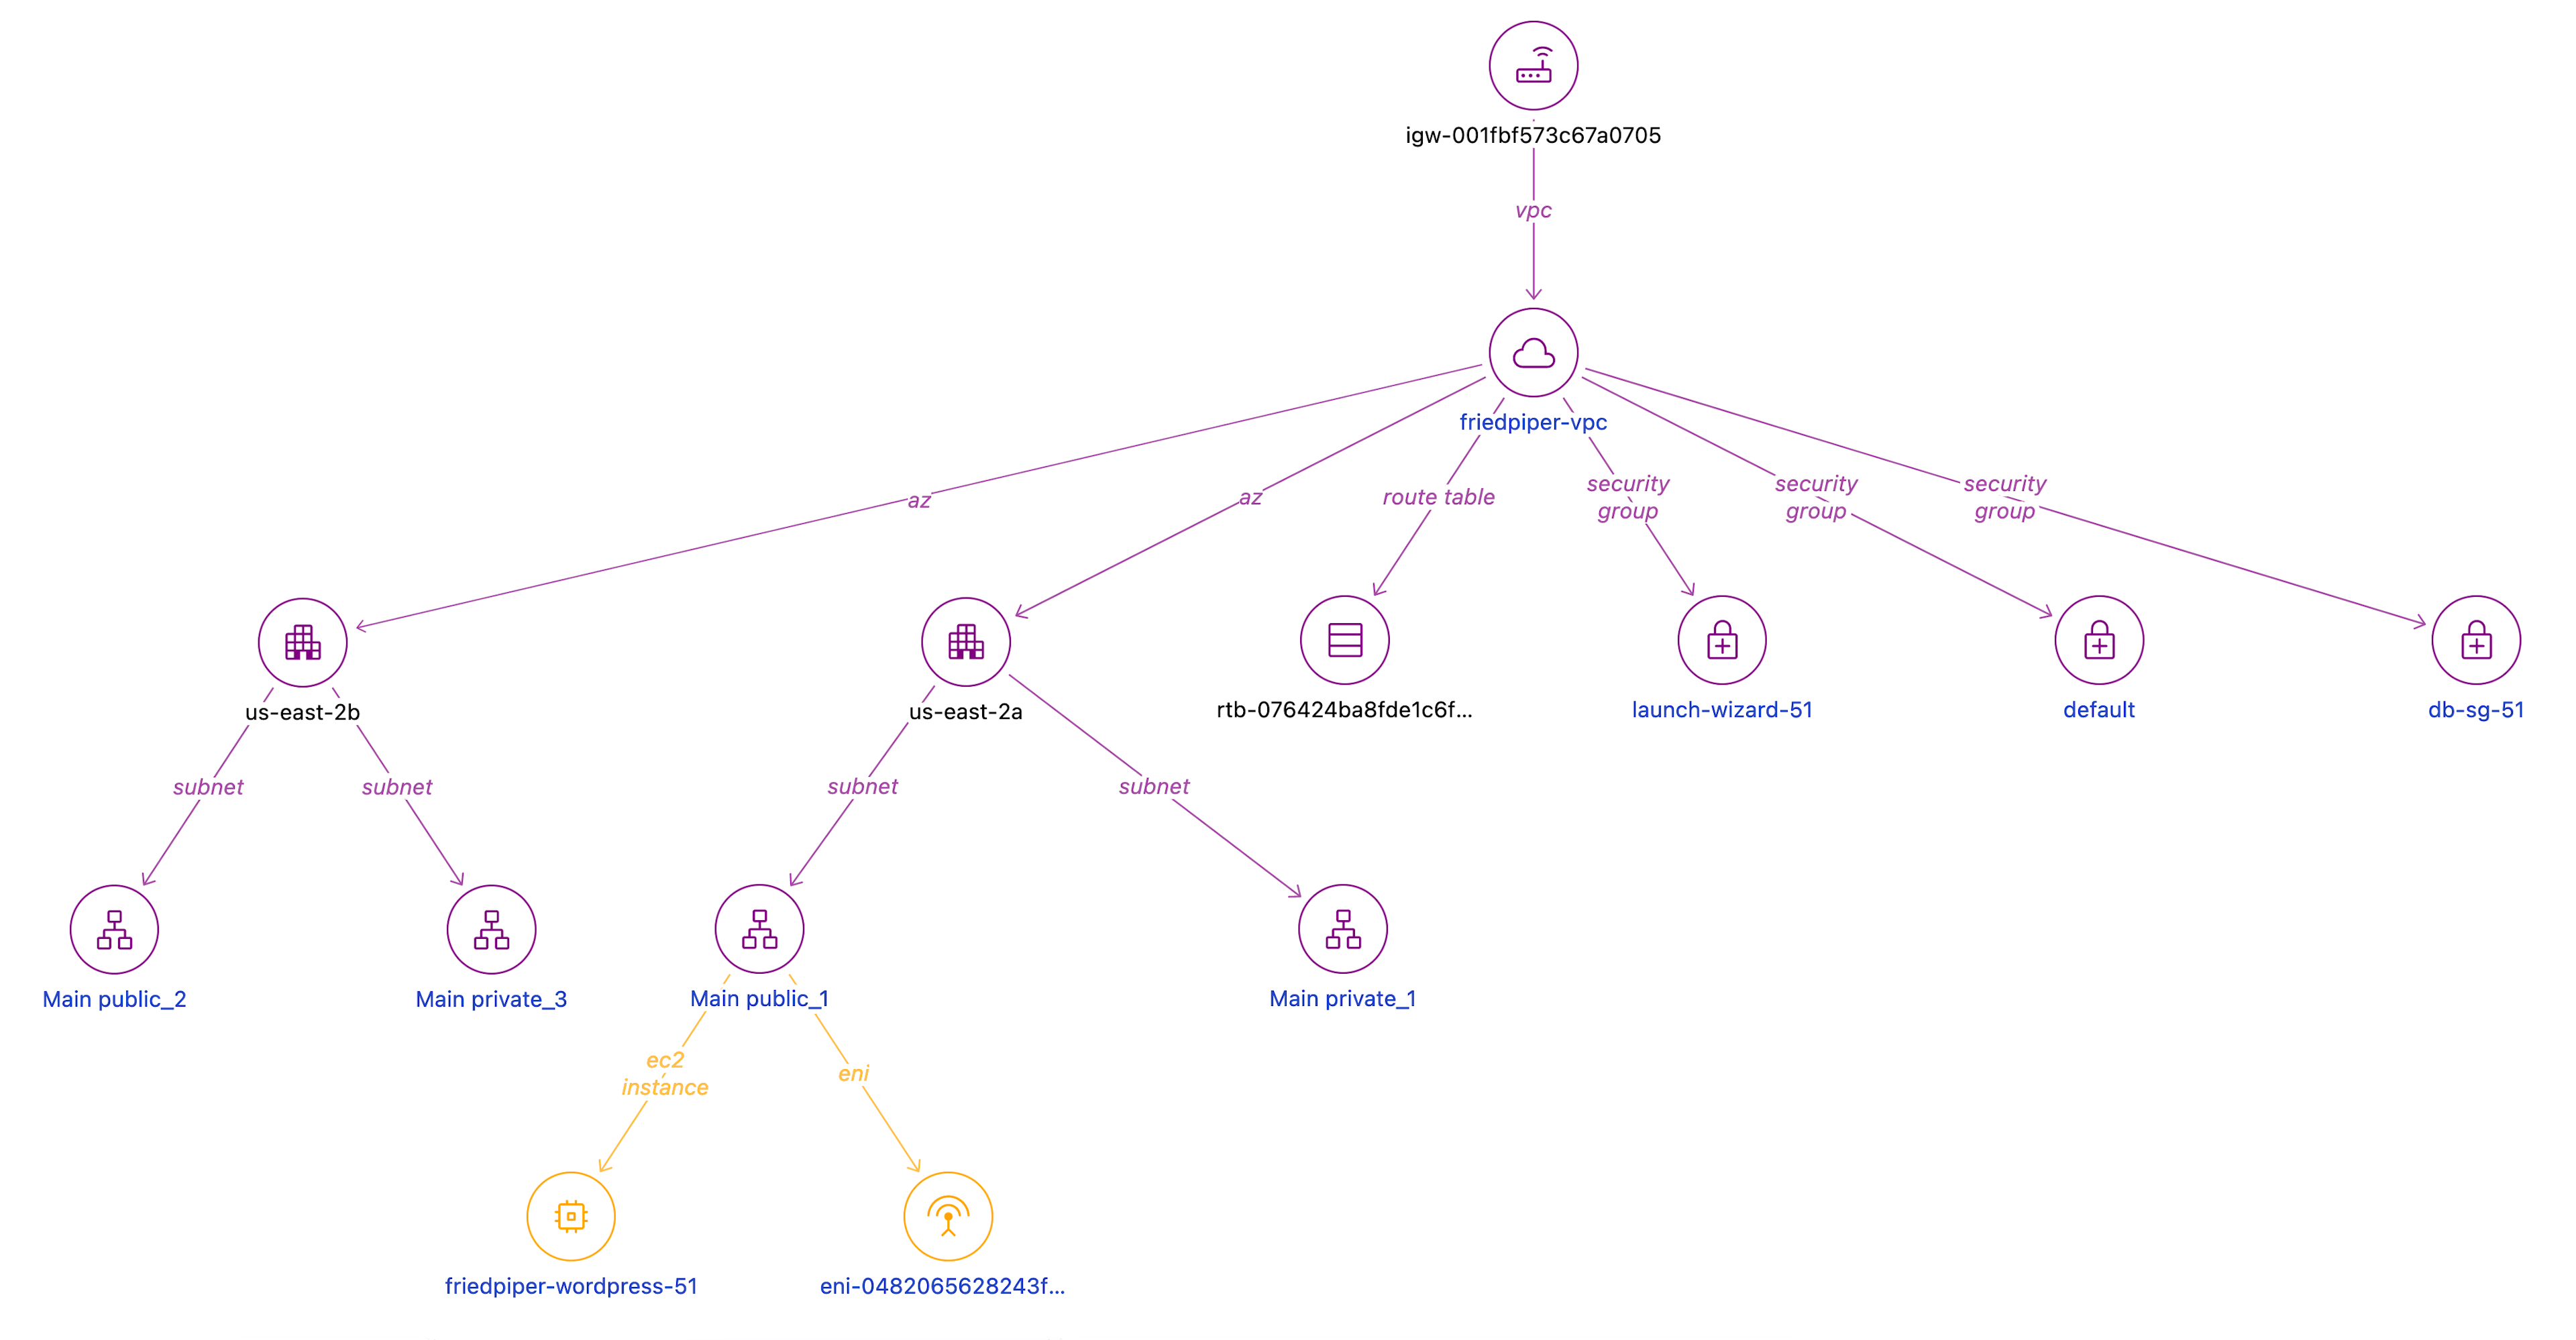 Steampipe VPC Relationship Graph